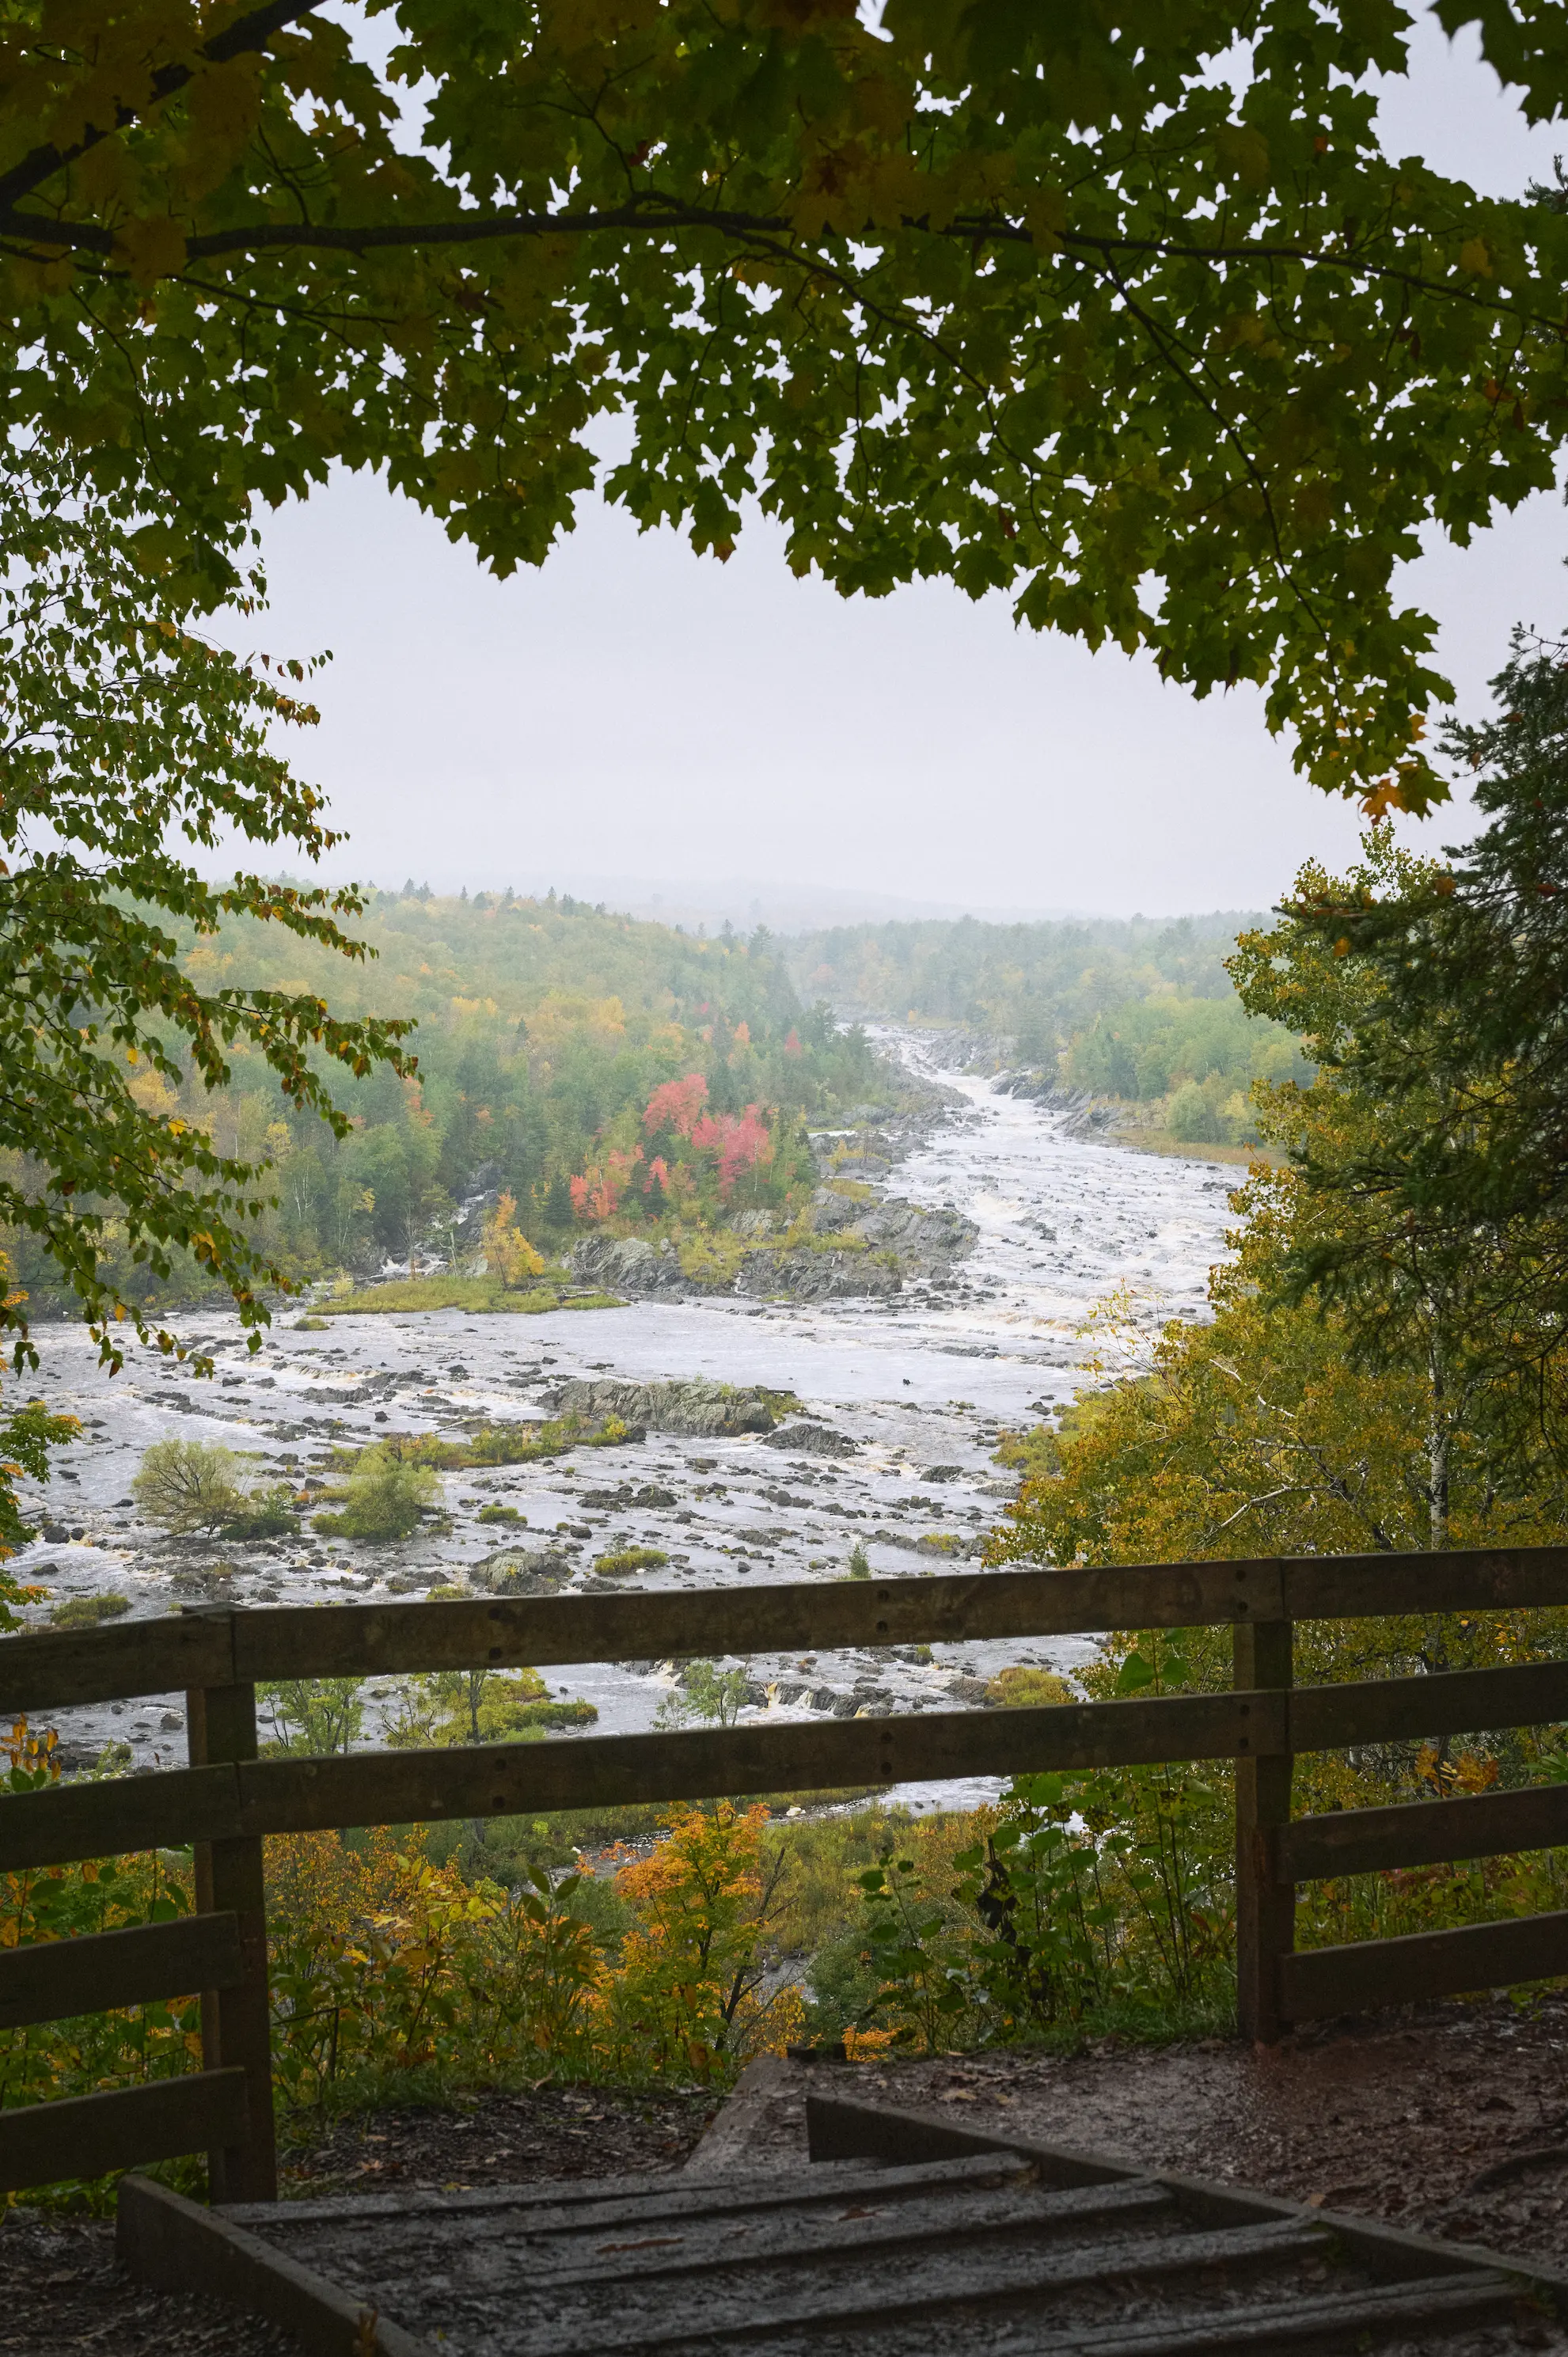 Through the trees, past a wooden fence, a massive river cuts through the dense Minnesotan north woods. Hundreds of rocks scatter in the rapids.